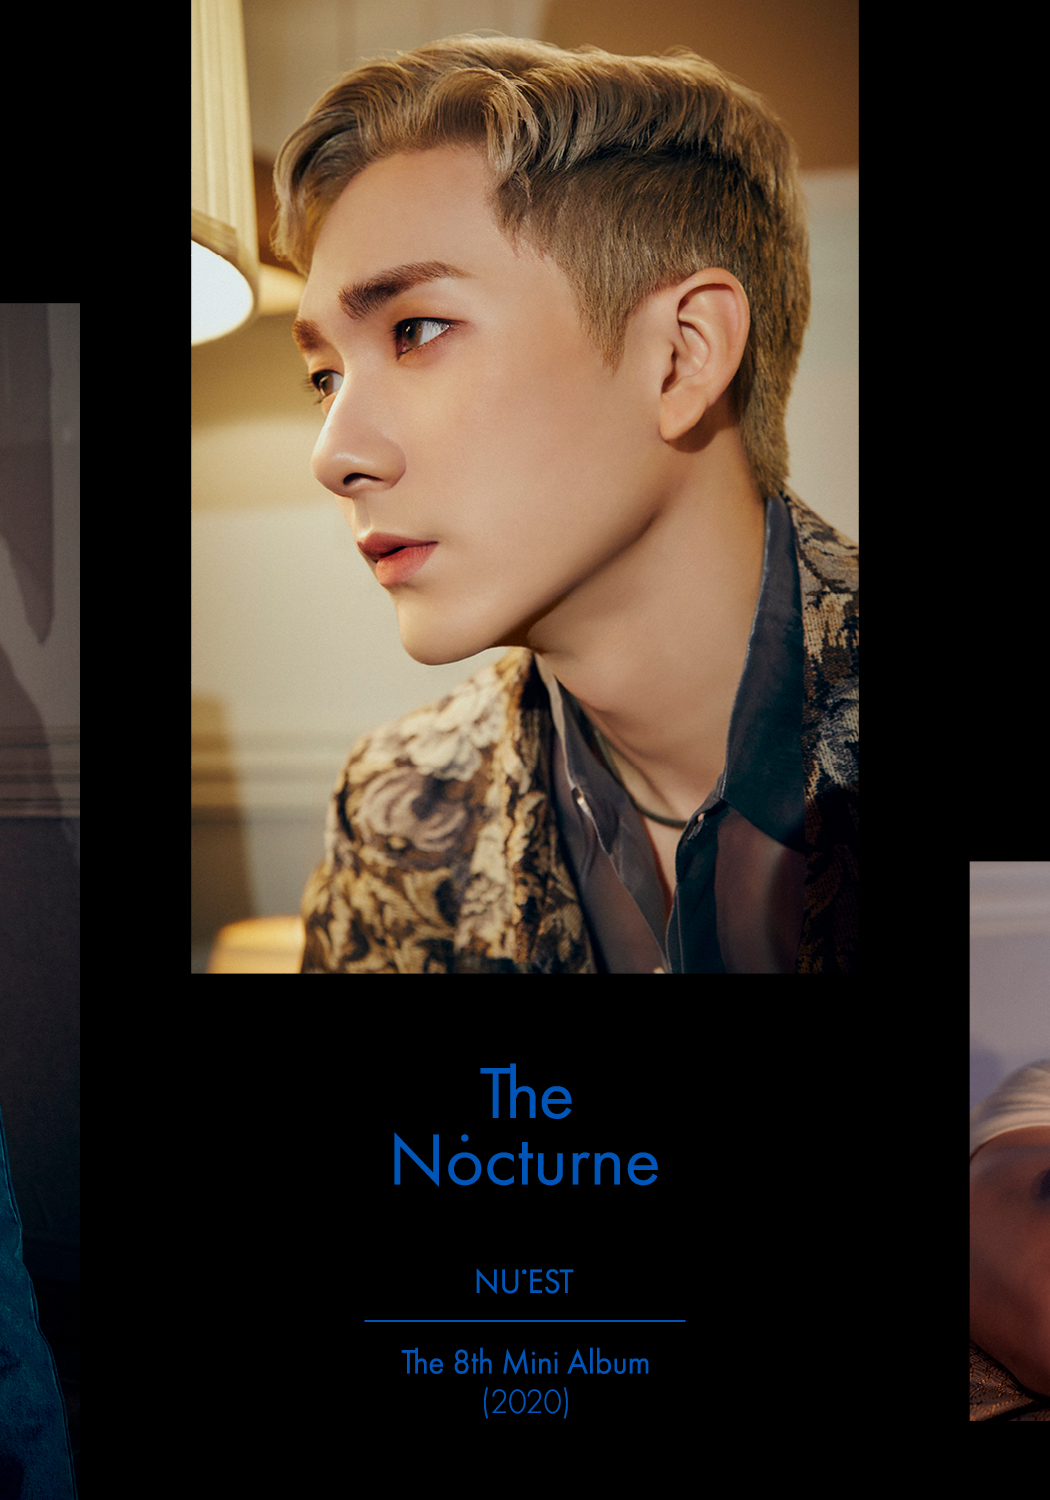 nuest-members-release-the-nocturne-teaser-image-and-trailer-2